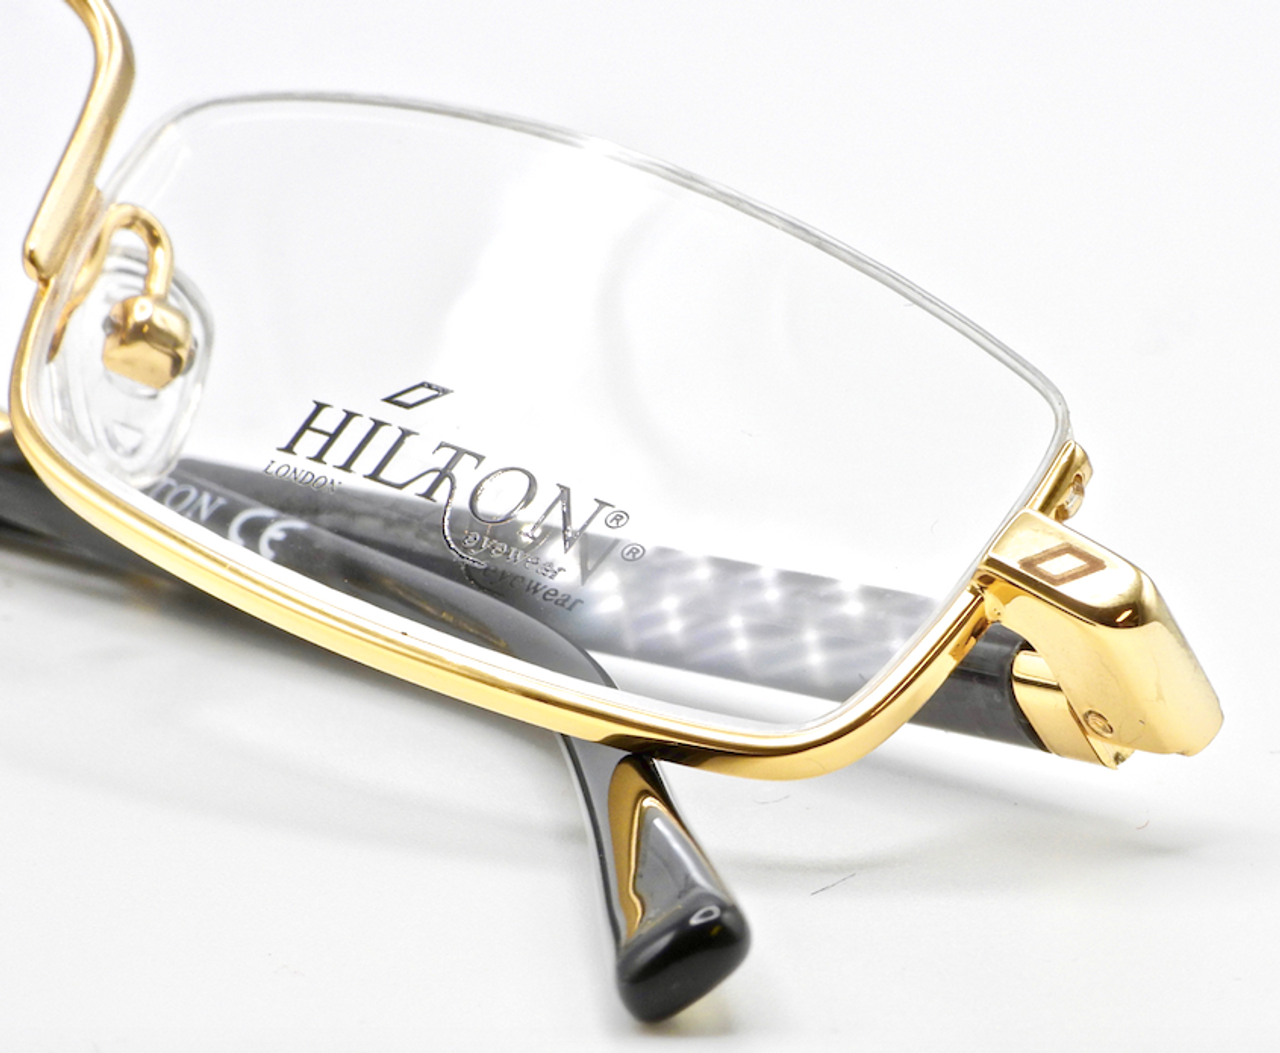 Lower Half Rim Reading Glasses By Hilton At Algha Works From www.theoldglassesshop.co.uk